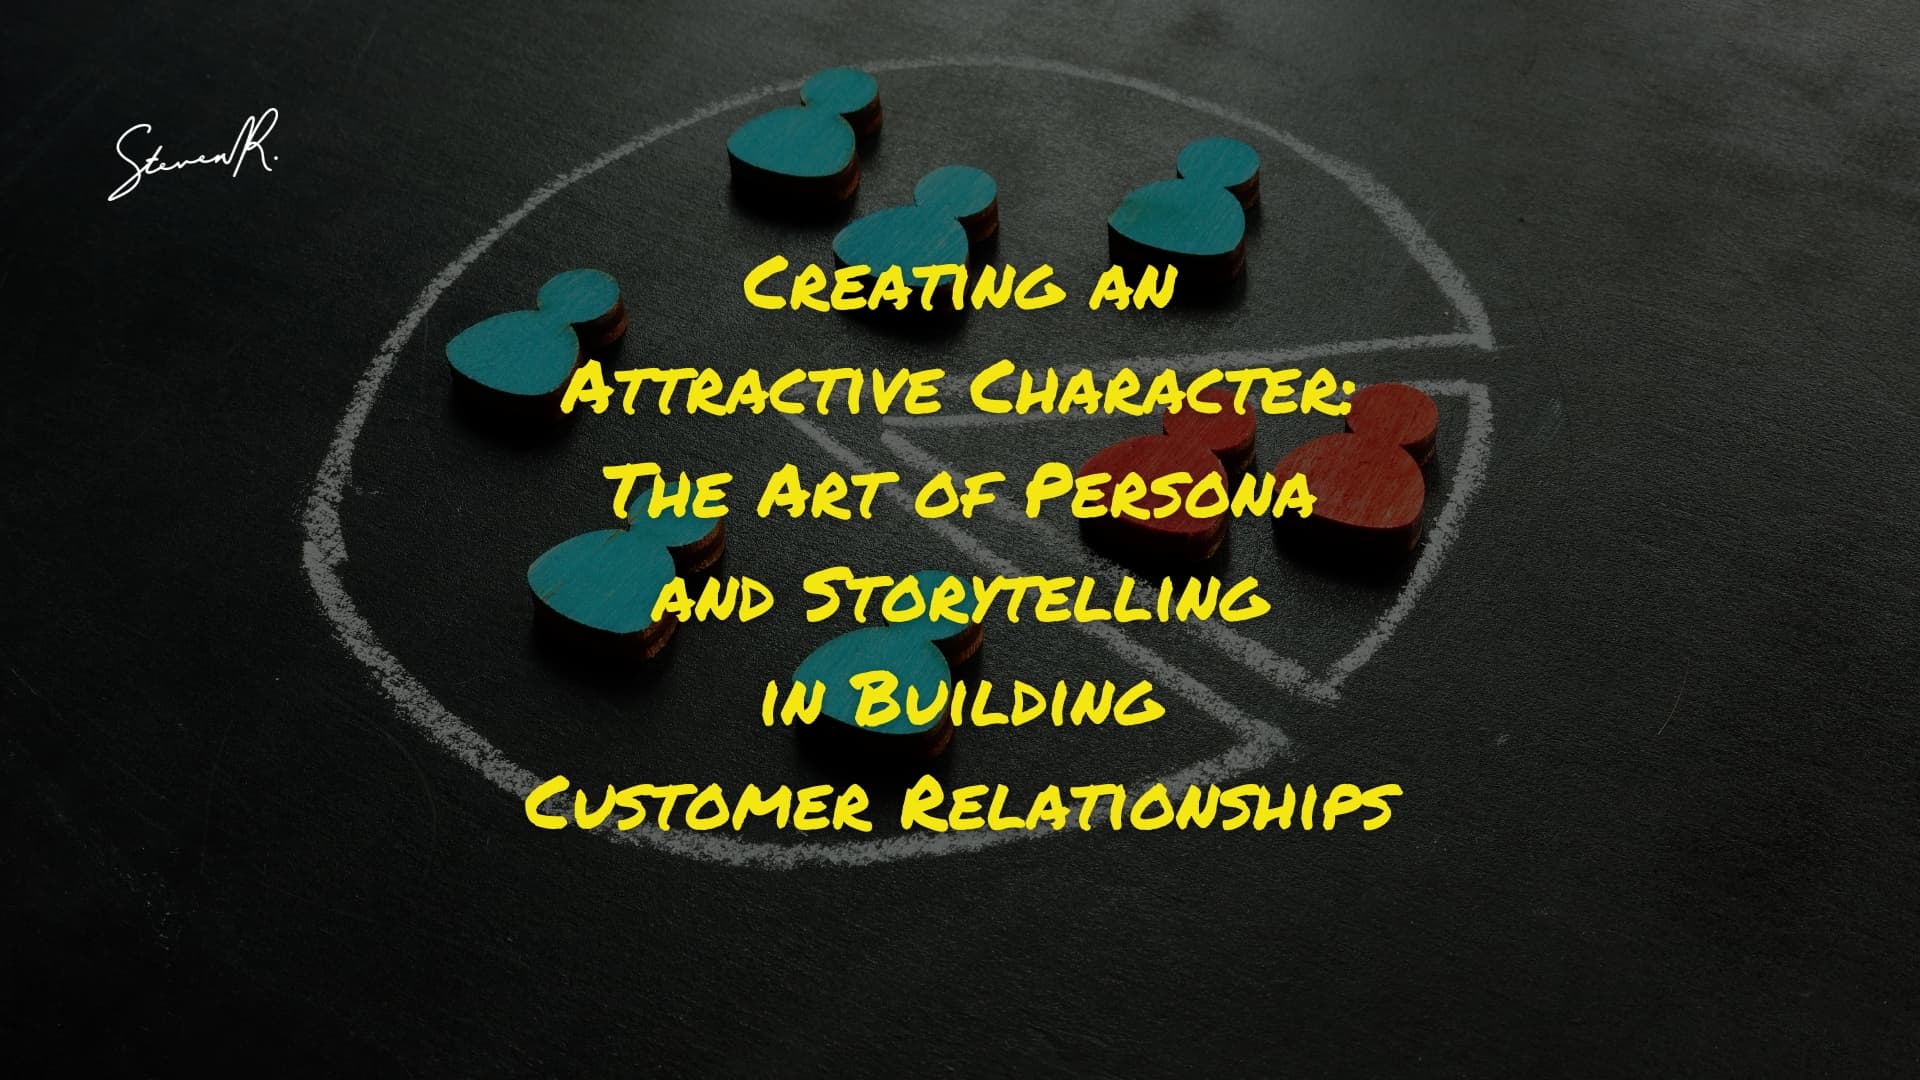 Creating an Attractive Character: The Art of Persona and Storytelling in Building Customer Relationships